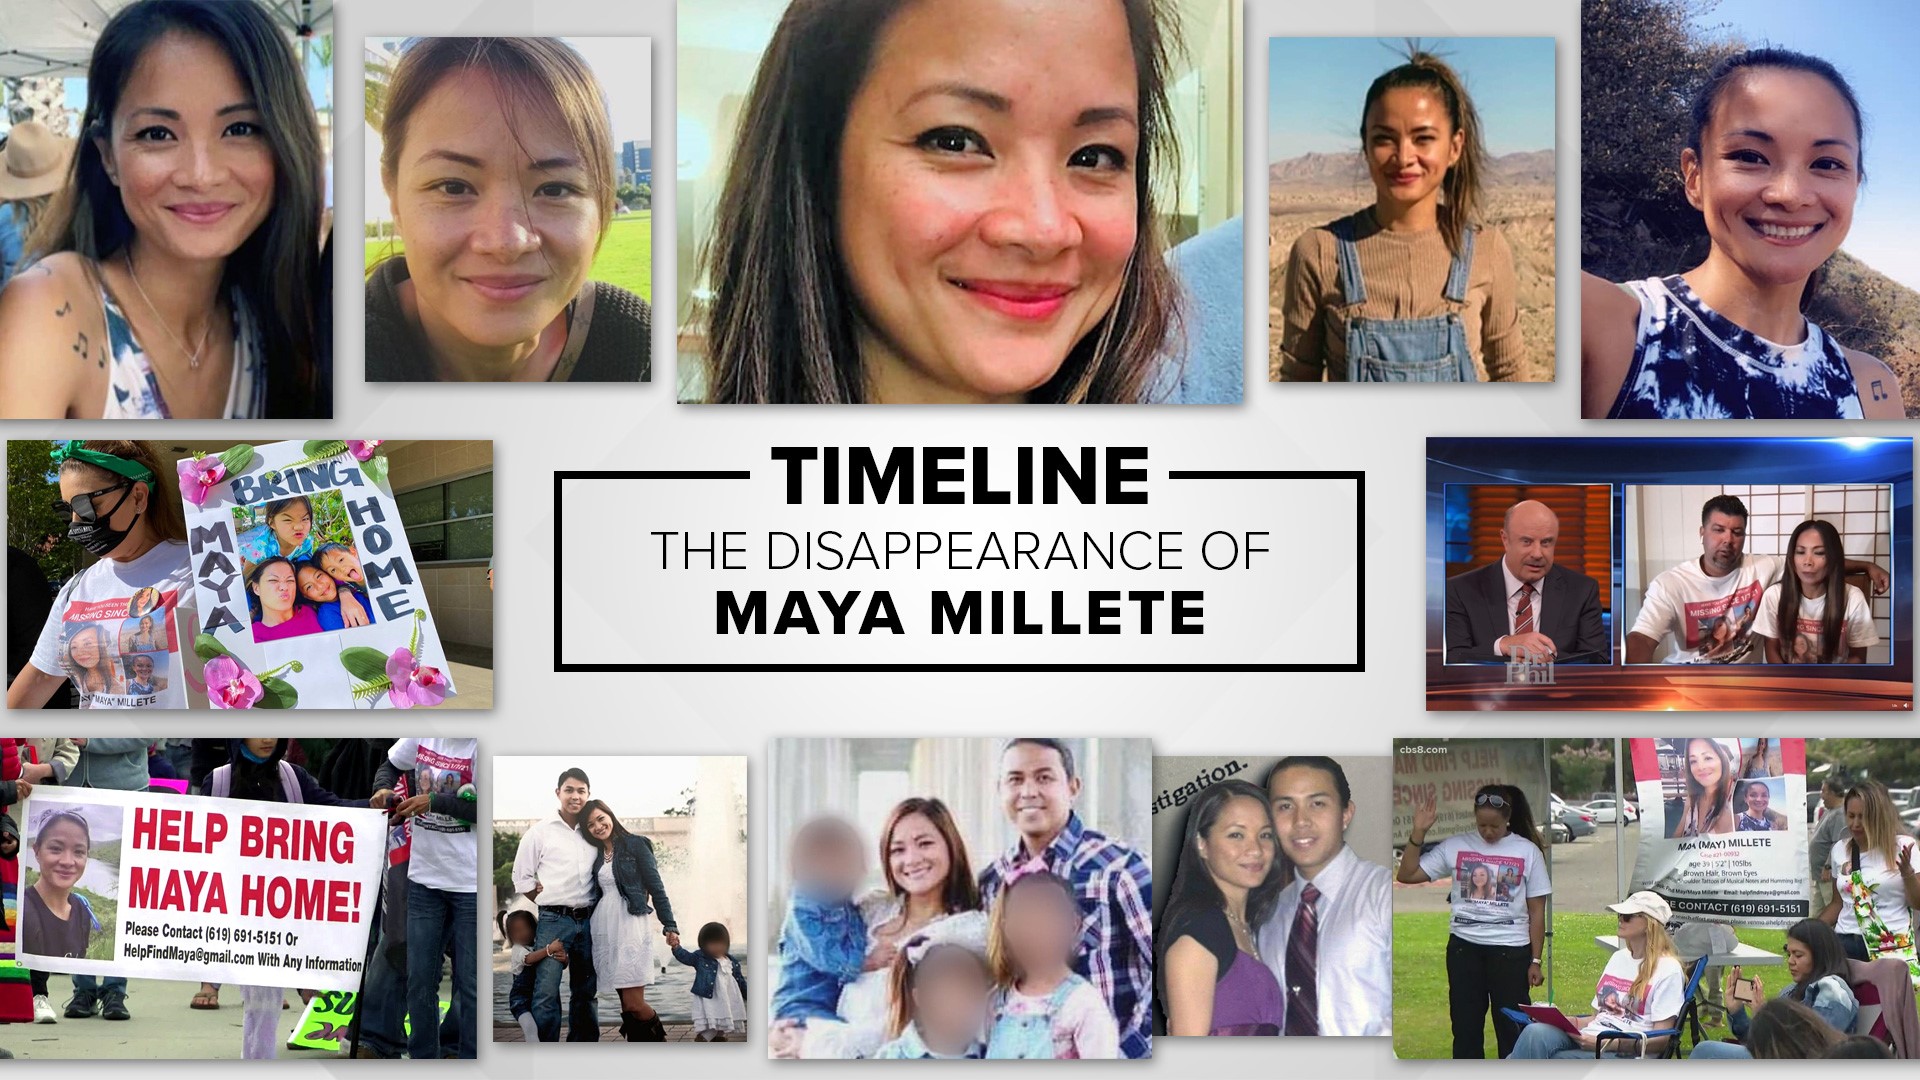 Chula Vista mother May "Maya" Millete was last seen on Jan. 7, 2021 and her husband Larry was arrested on Oct. 19, 2021. Here's what we know after more than 2 years.